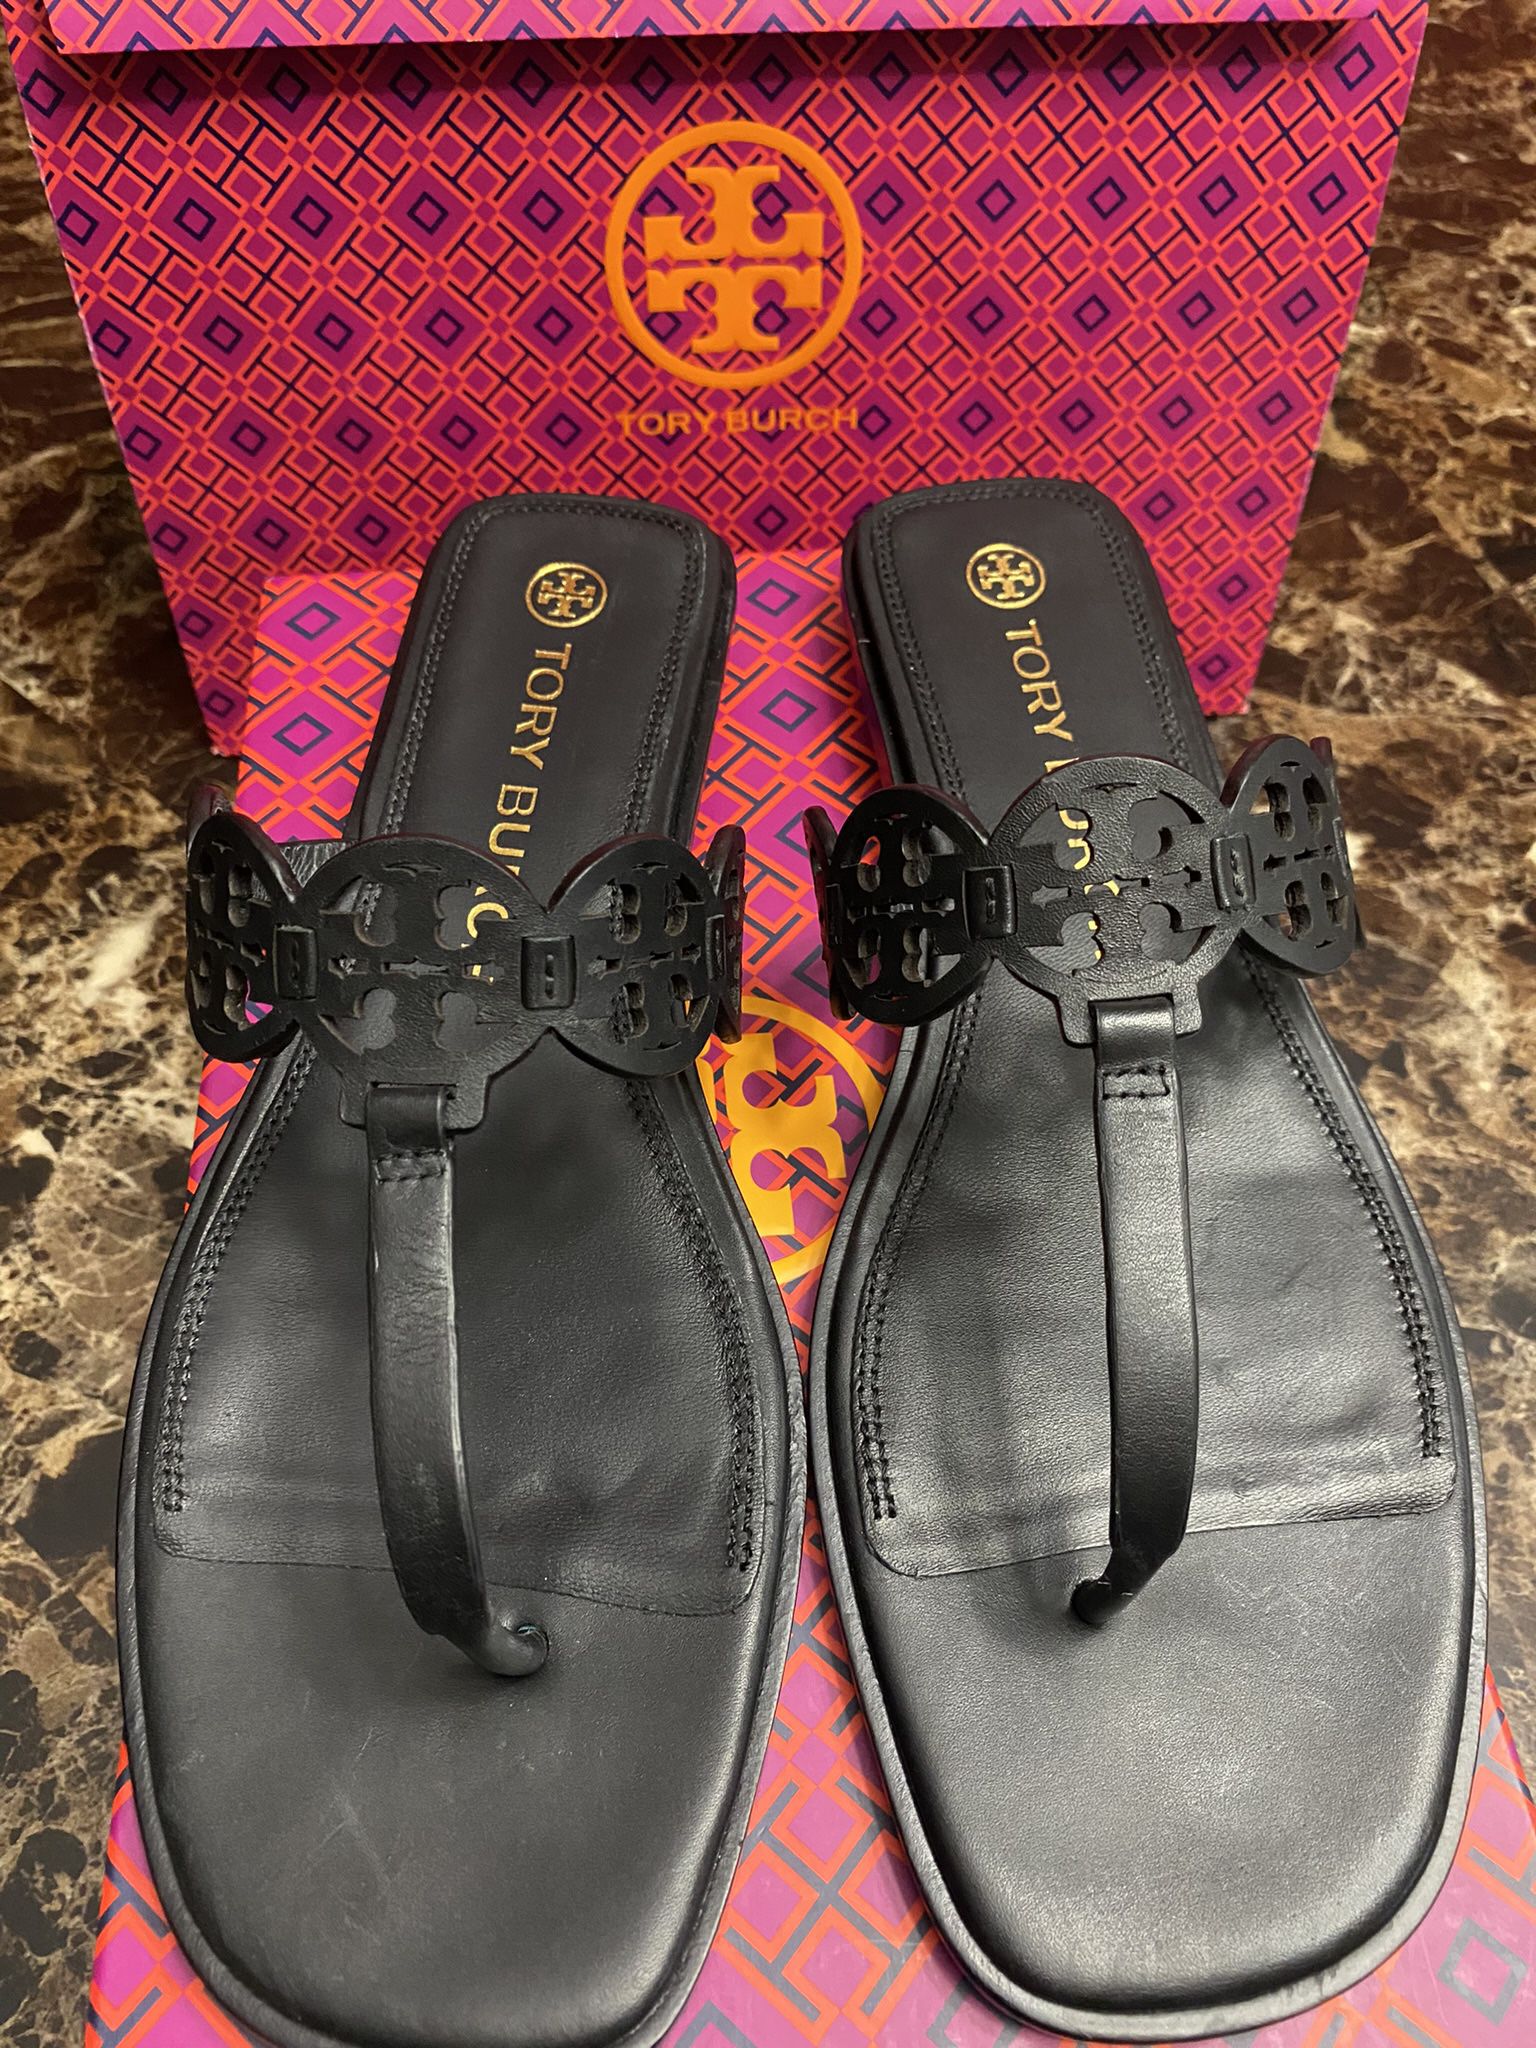 Tory Burch Tiny Miller Thong Sandal for Sale in Arlington, TX - OfferUp